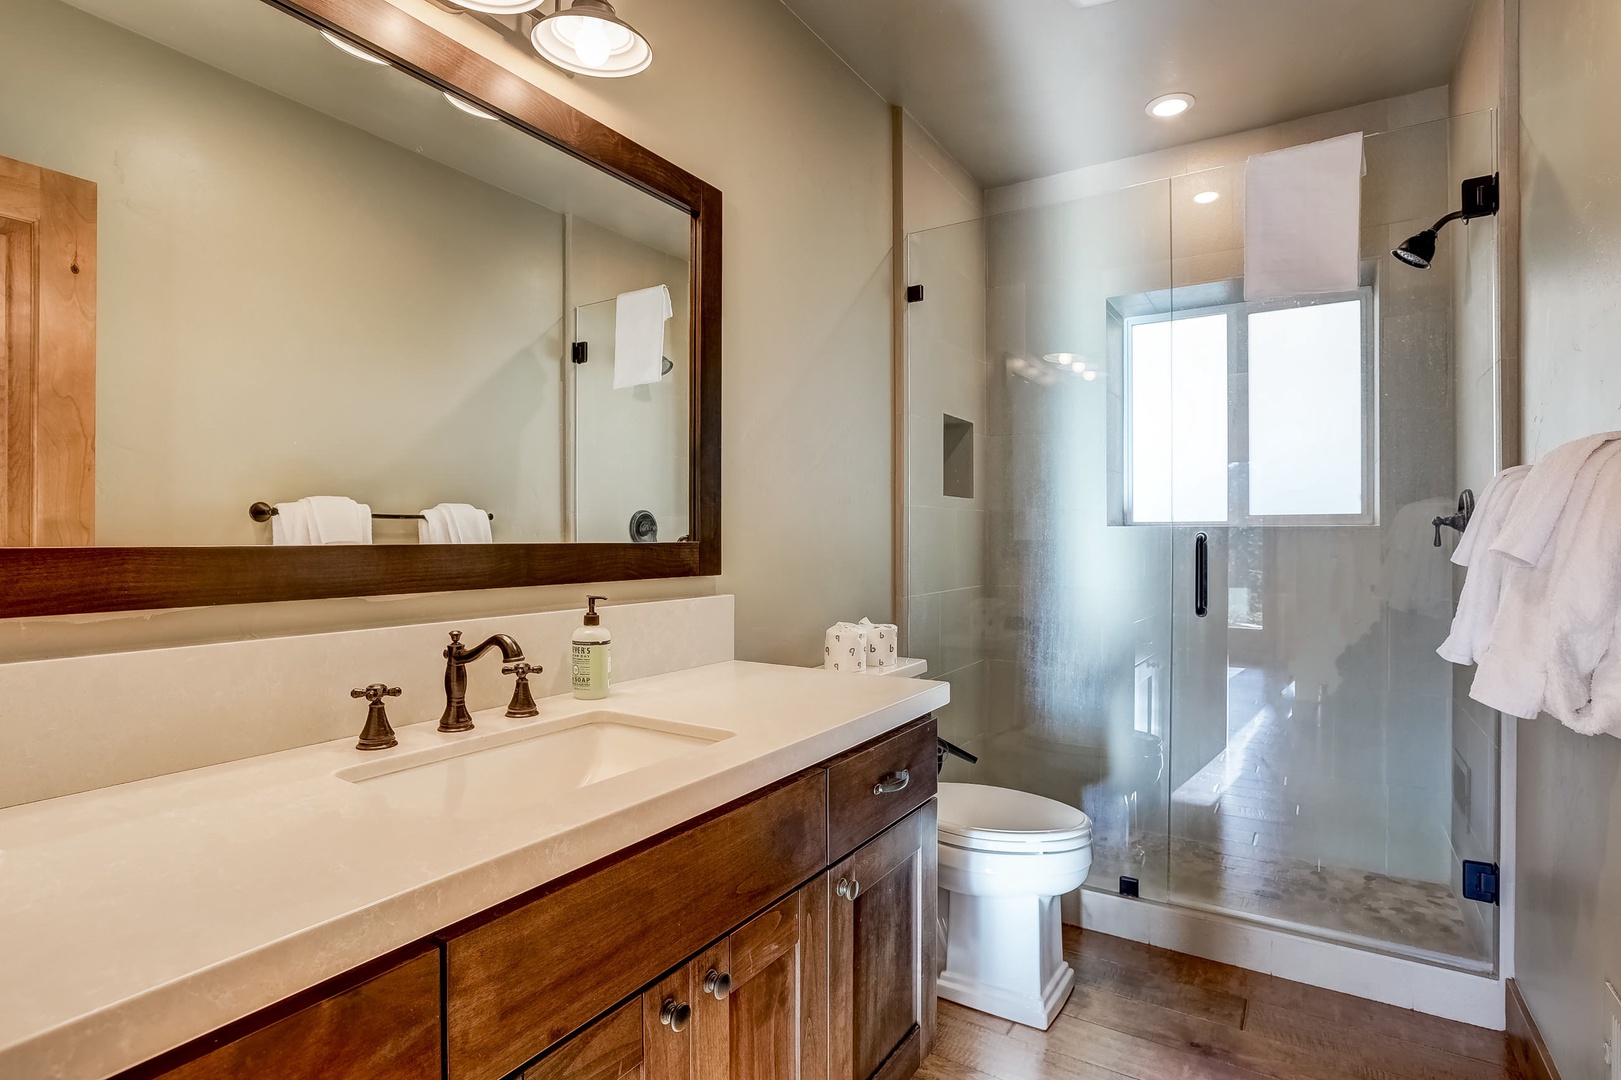 Shared bathroom with standing shower on main floor